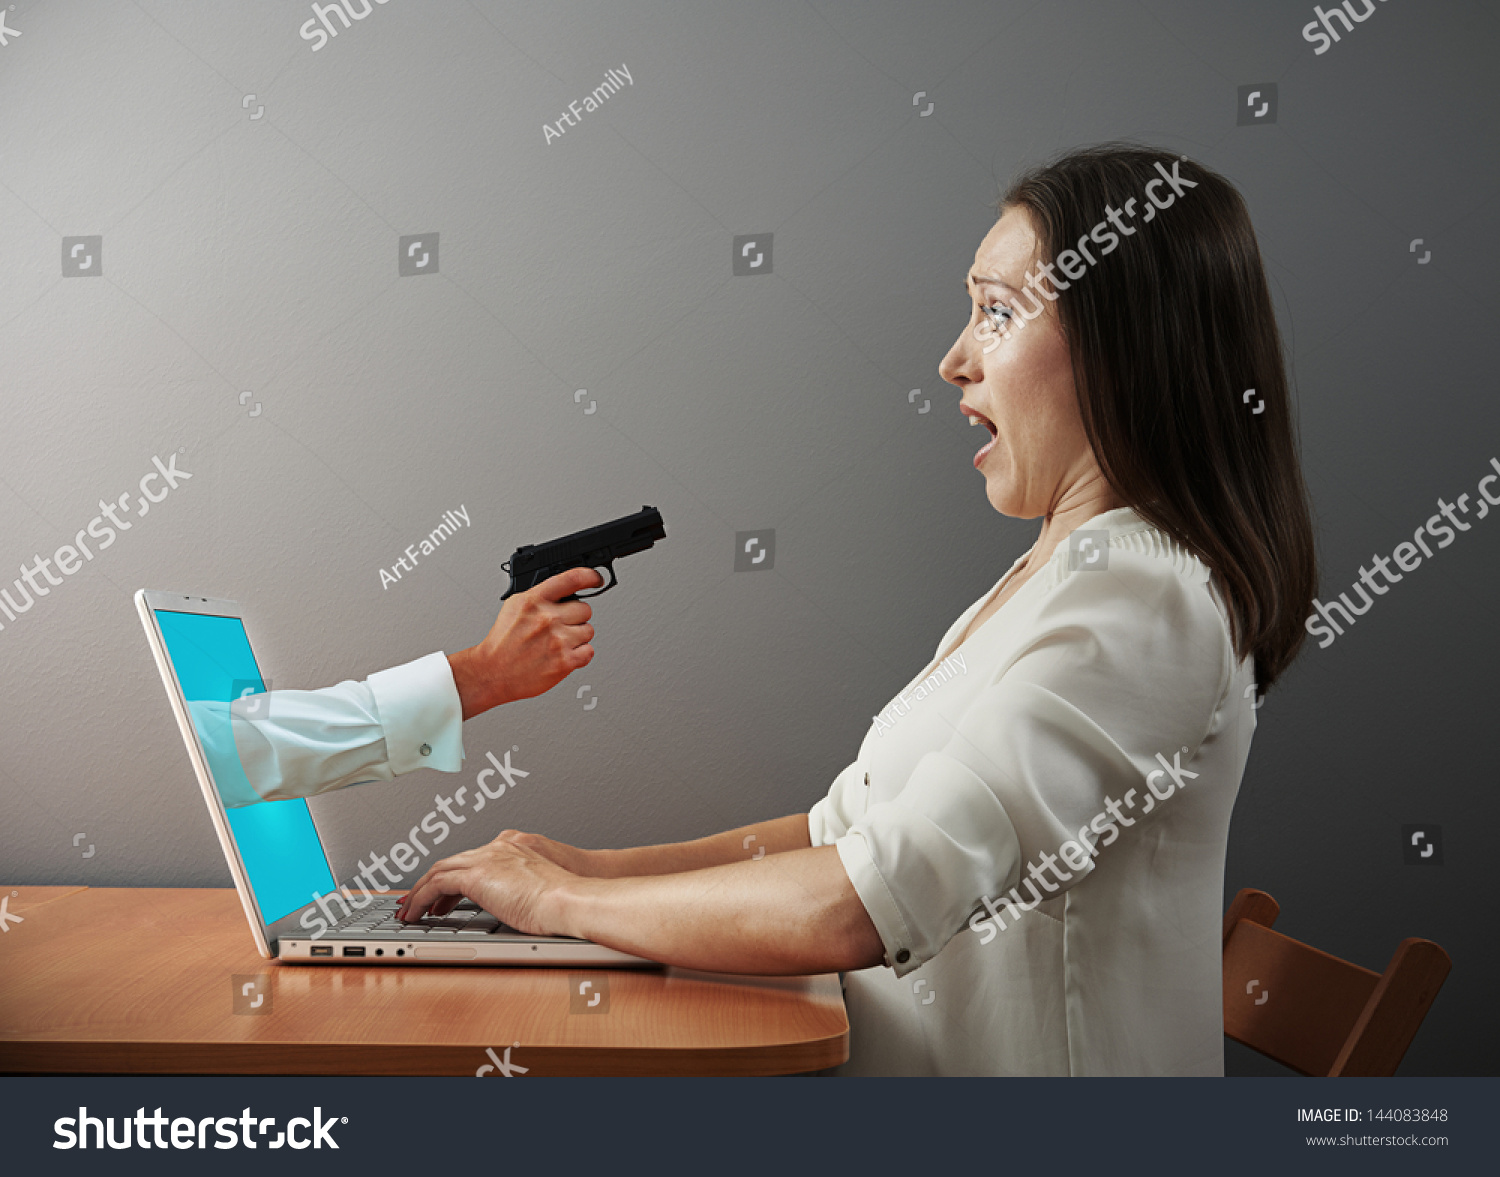 startled woman looking at hand with gun #144083848